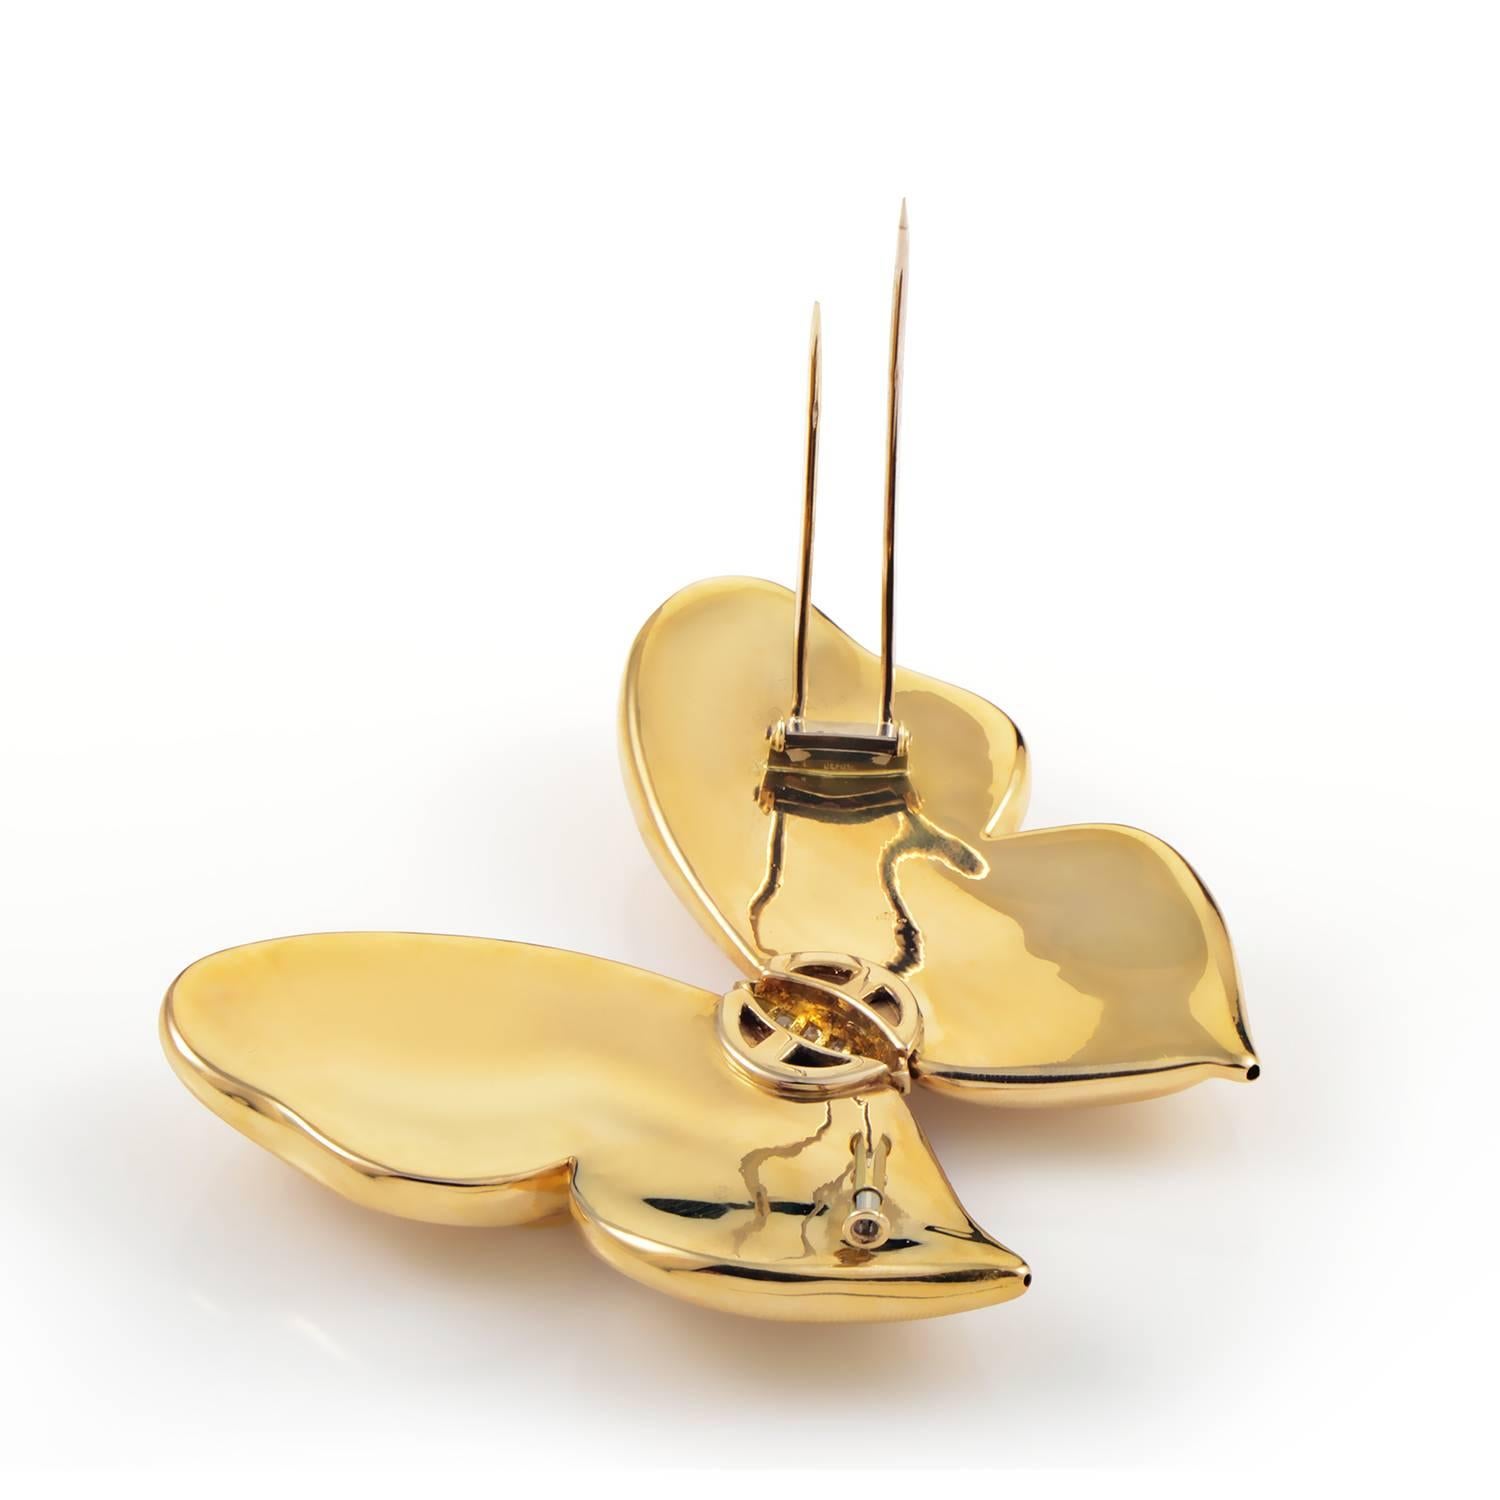 Returning once again to the ever-enchanting motif of a butterfly and reducing its colorful nature to the luxurious radiance of 18K yellow gold, Van Cleef & Arpels presents this adorable pin embellished with 0.40ct of glittering diamonds.